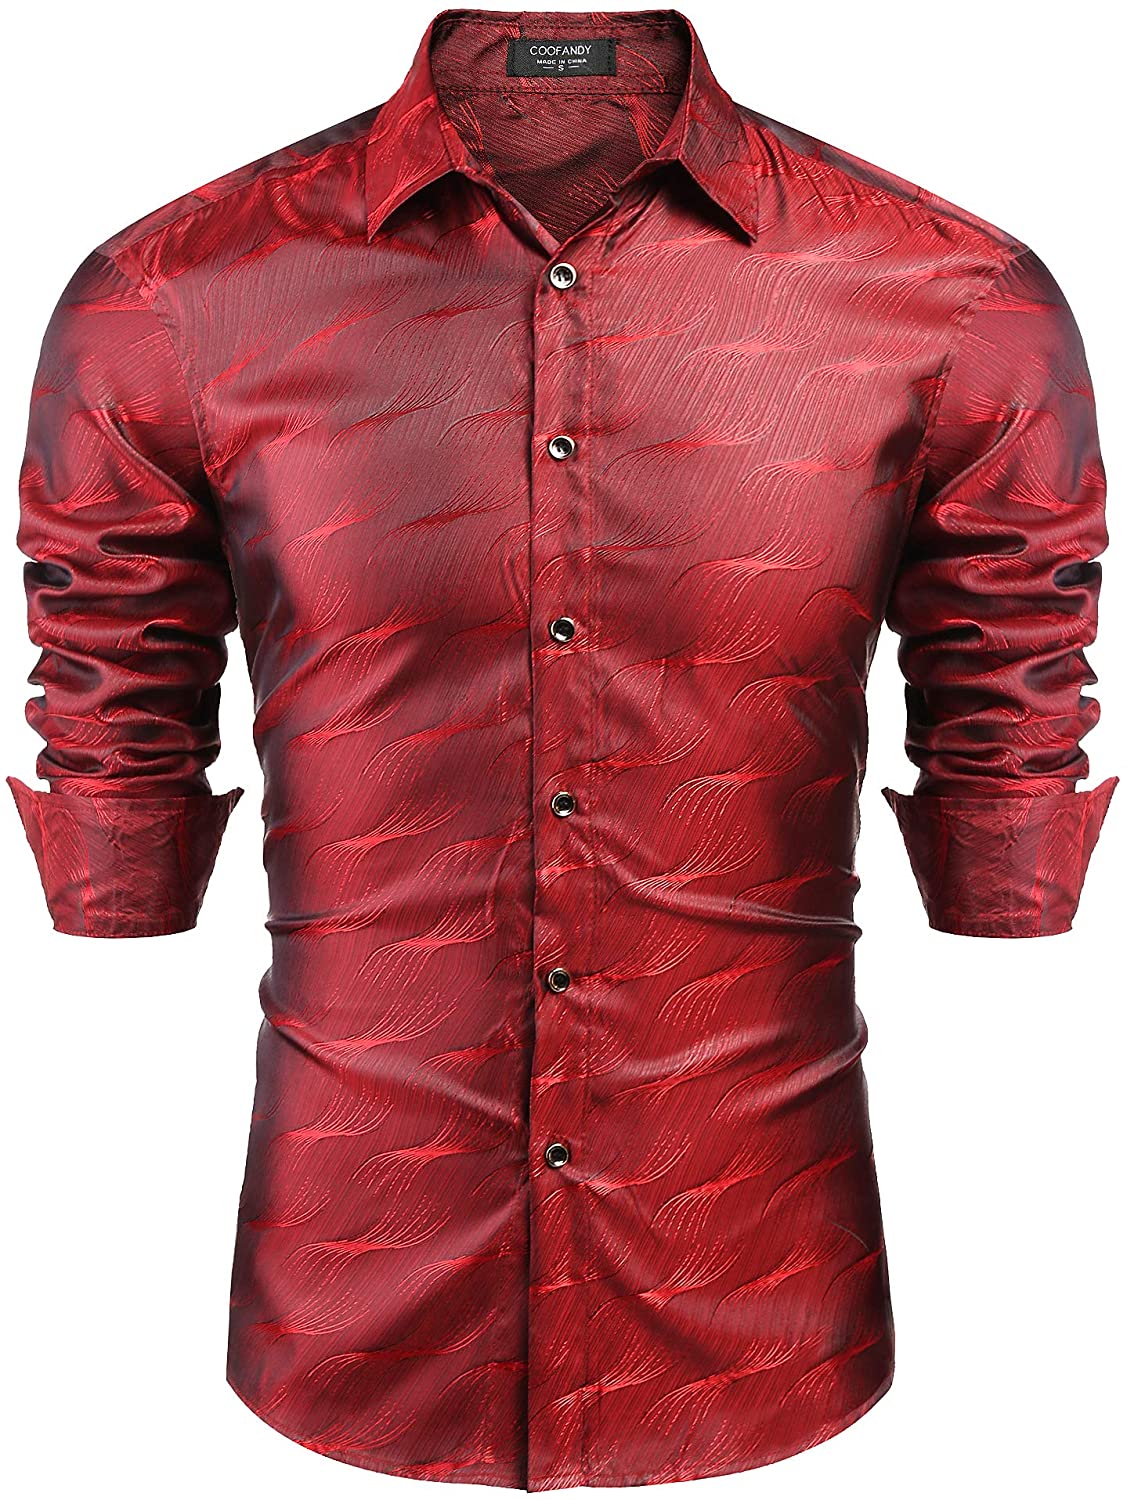 COOFANDY Men's Muscle Fit Dress Shirts Wrinkle-Free Long Sleeve Casual Button Down Shirt 